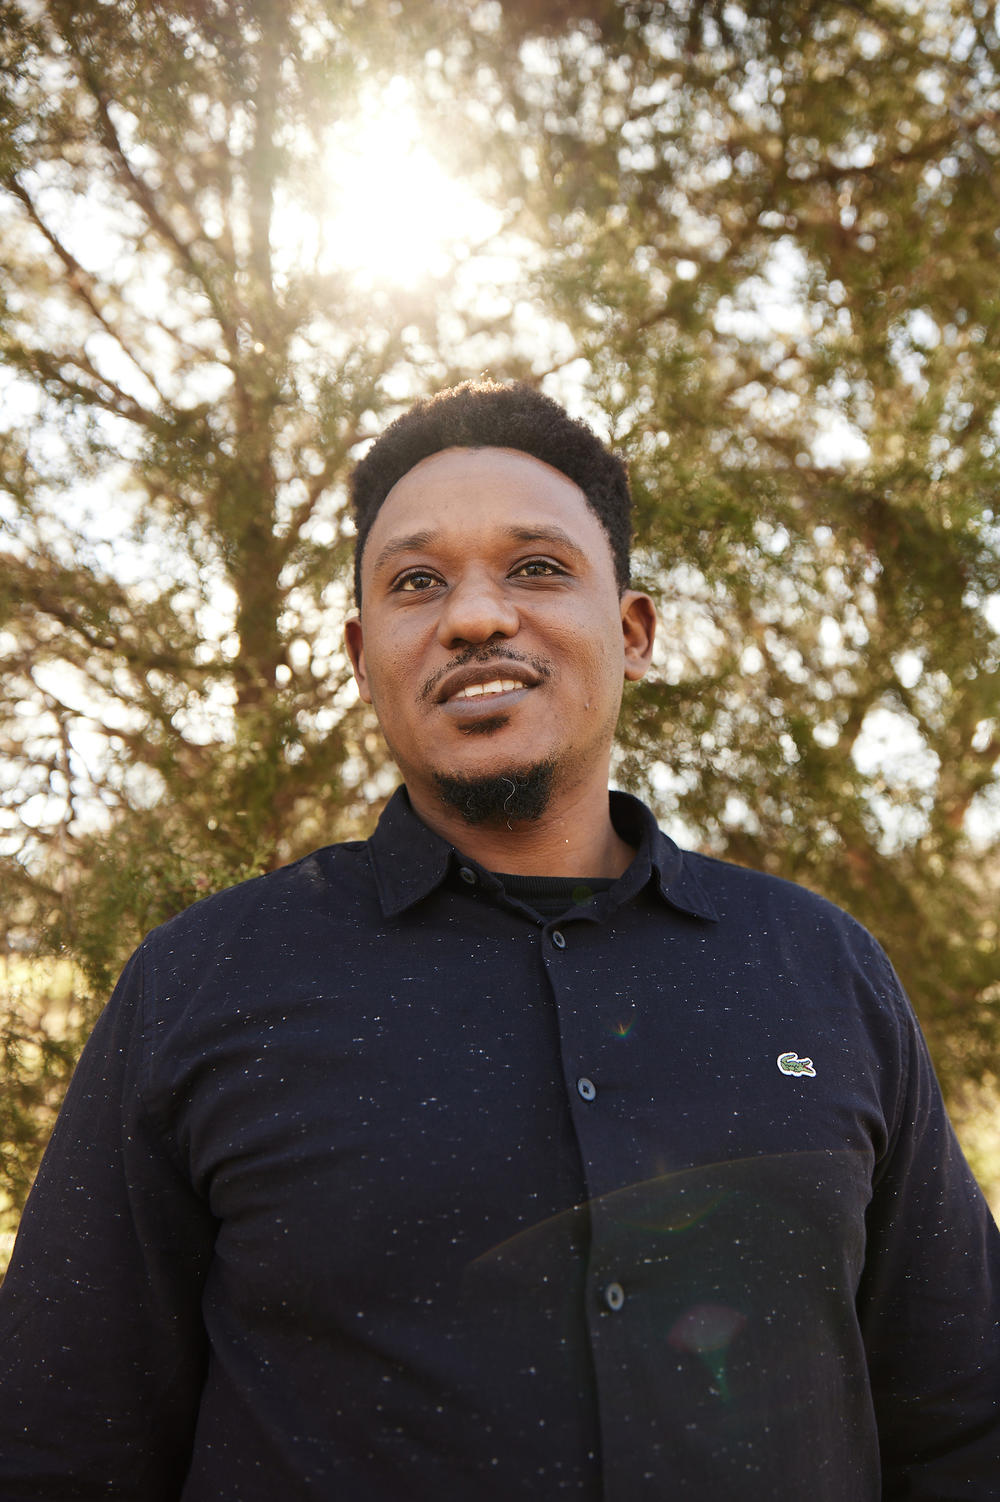 Gatebuke runs the African Great Lakes Action Network and recently co-edited a book where he and more than a hundred other Rwandans shared their testimonies about the genocide in 1994.